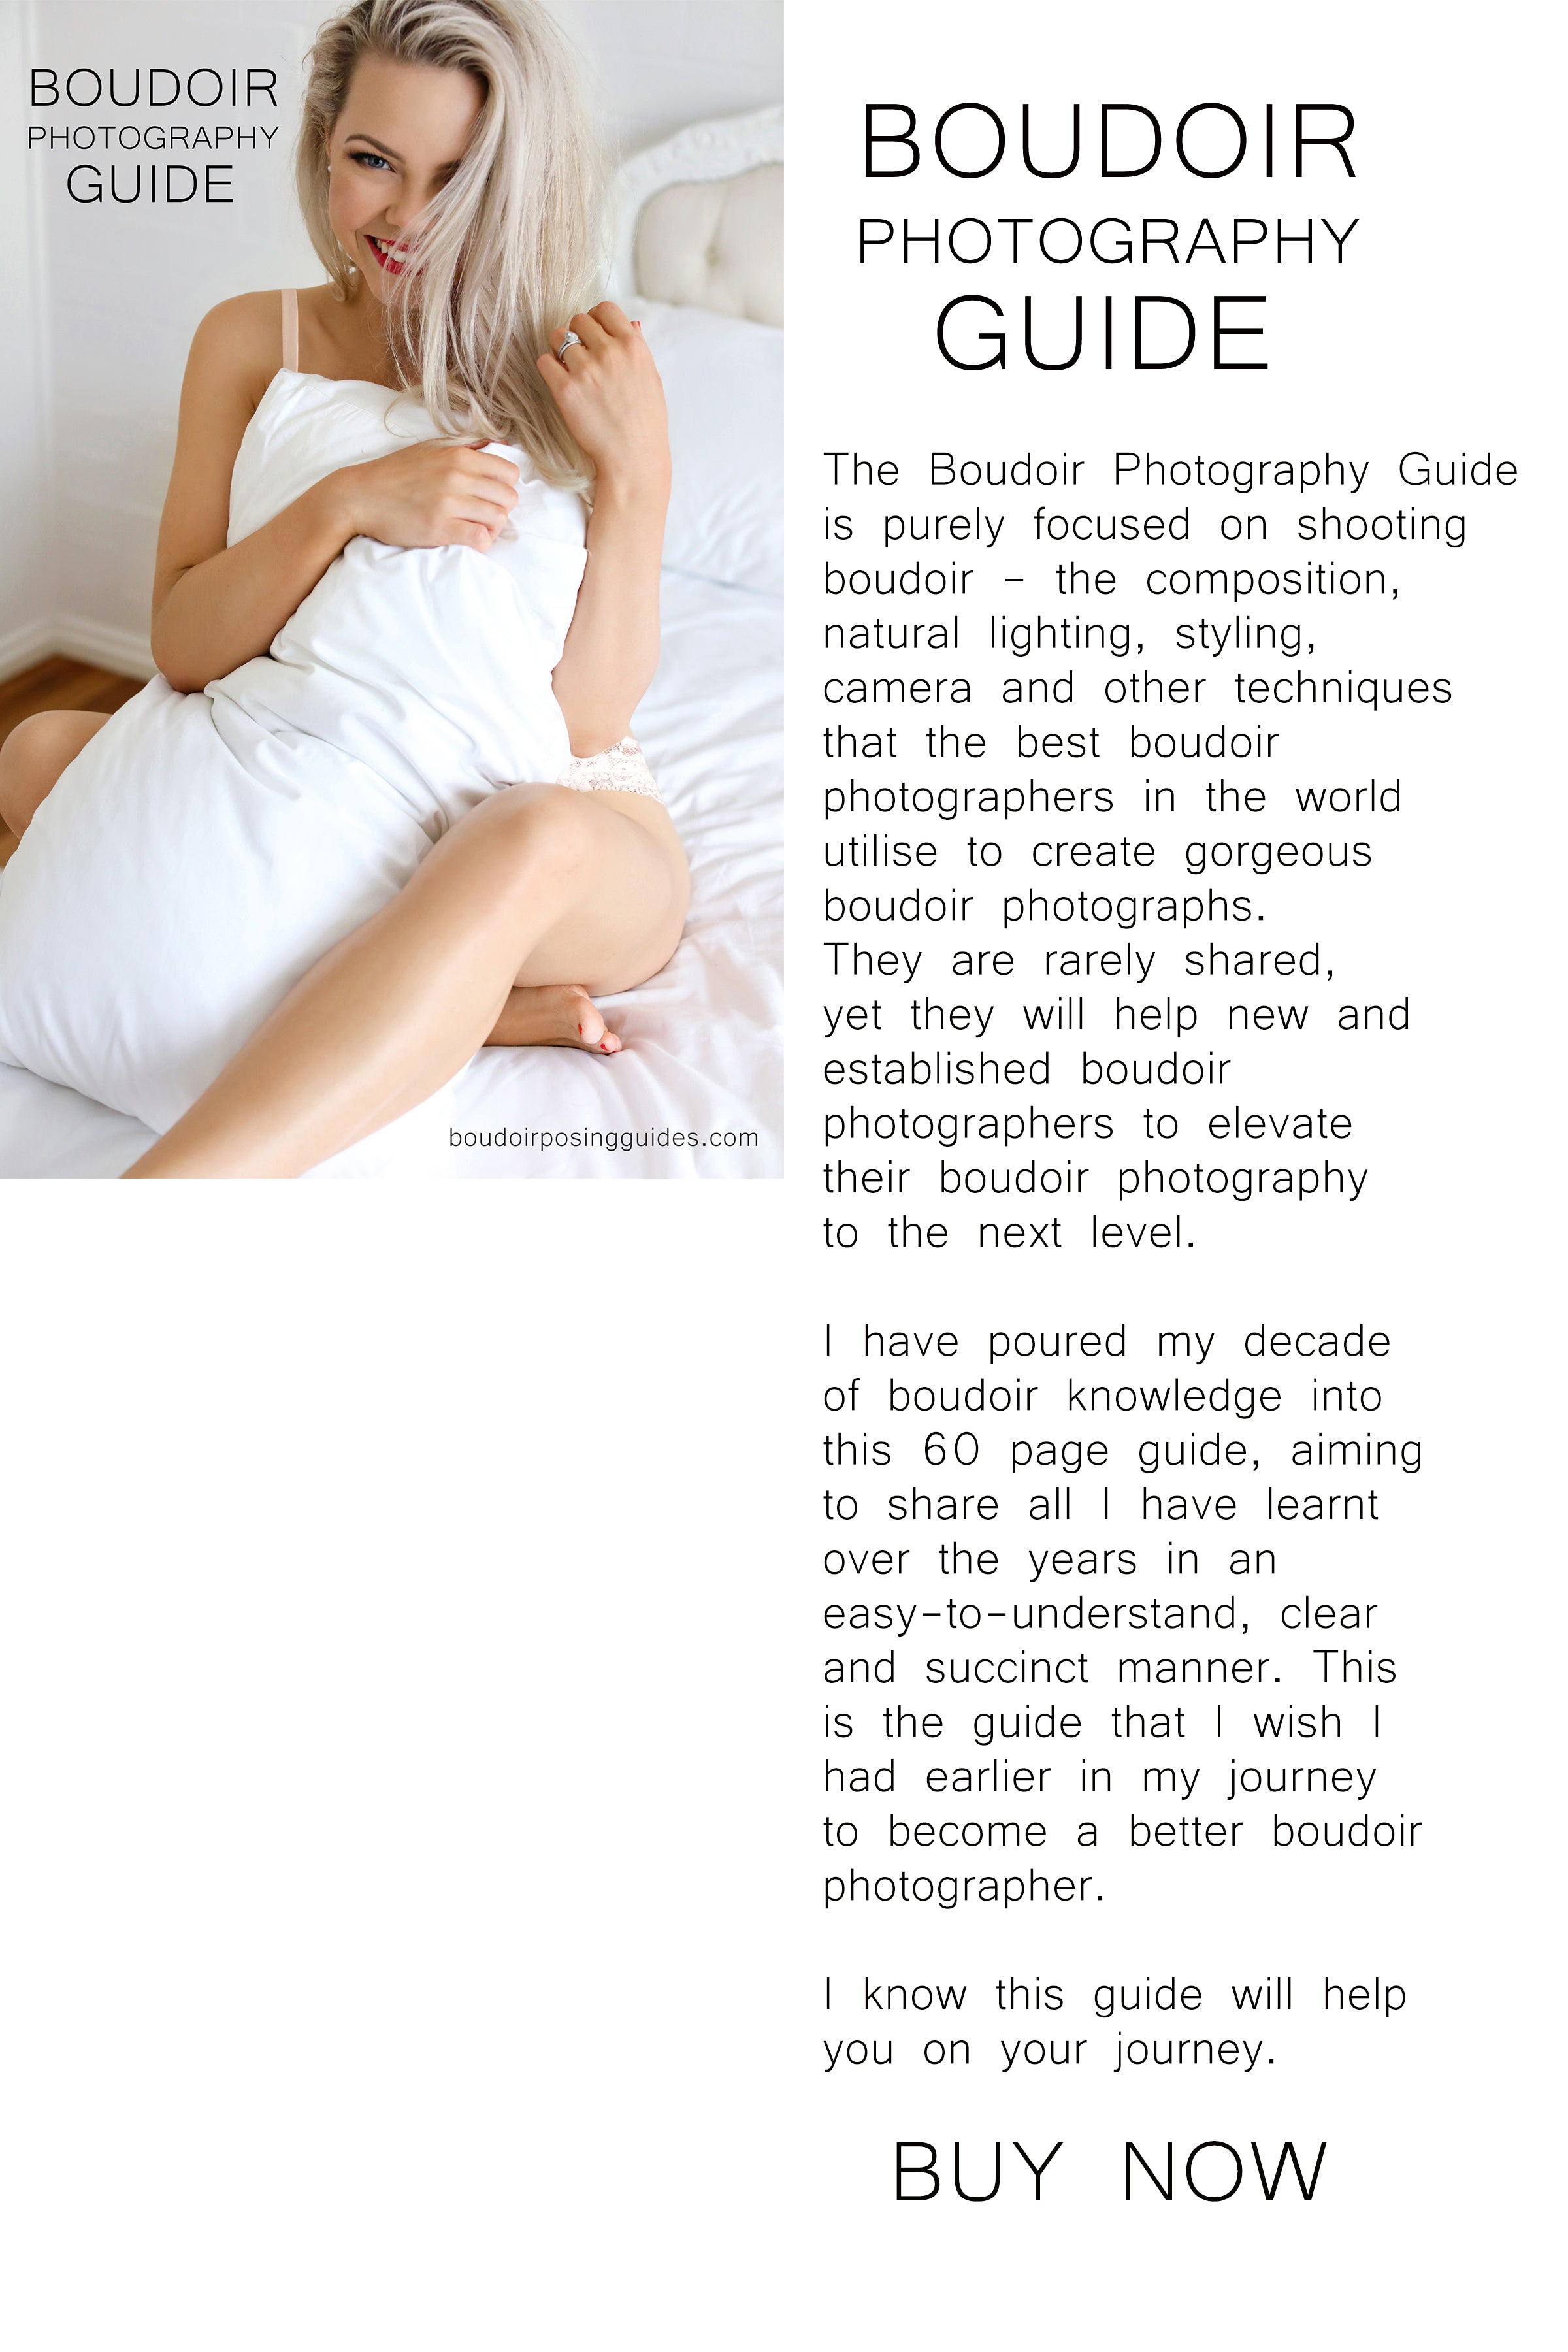 8 Beginner Boudoir Photography MISTAKES and How to Fix Them - Photography  Blog Tips - ISO 1200 Magazine